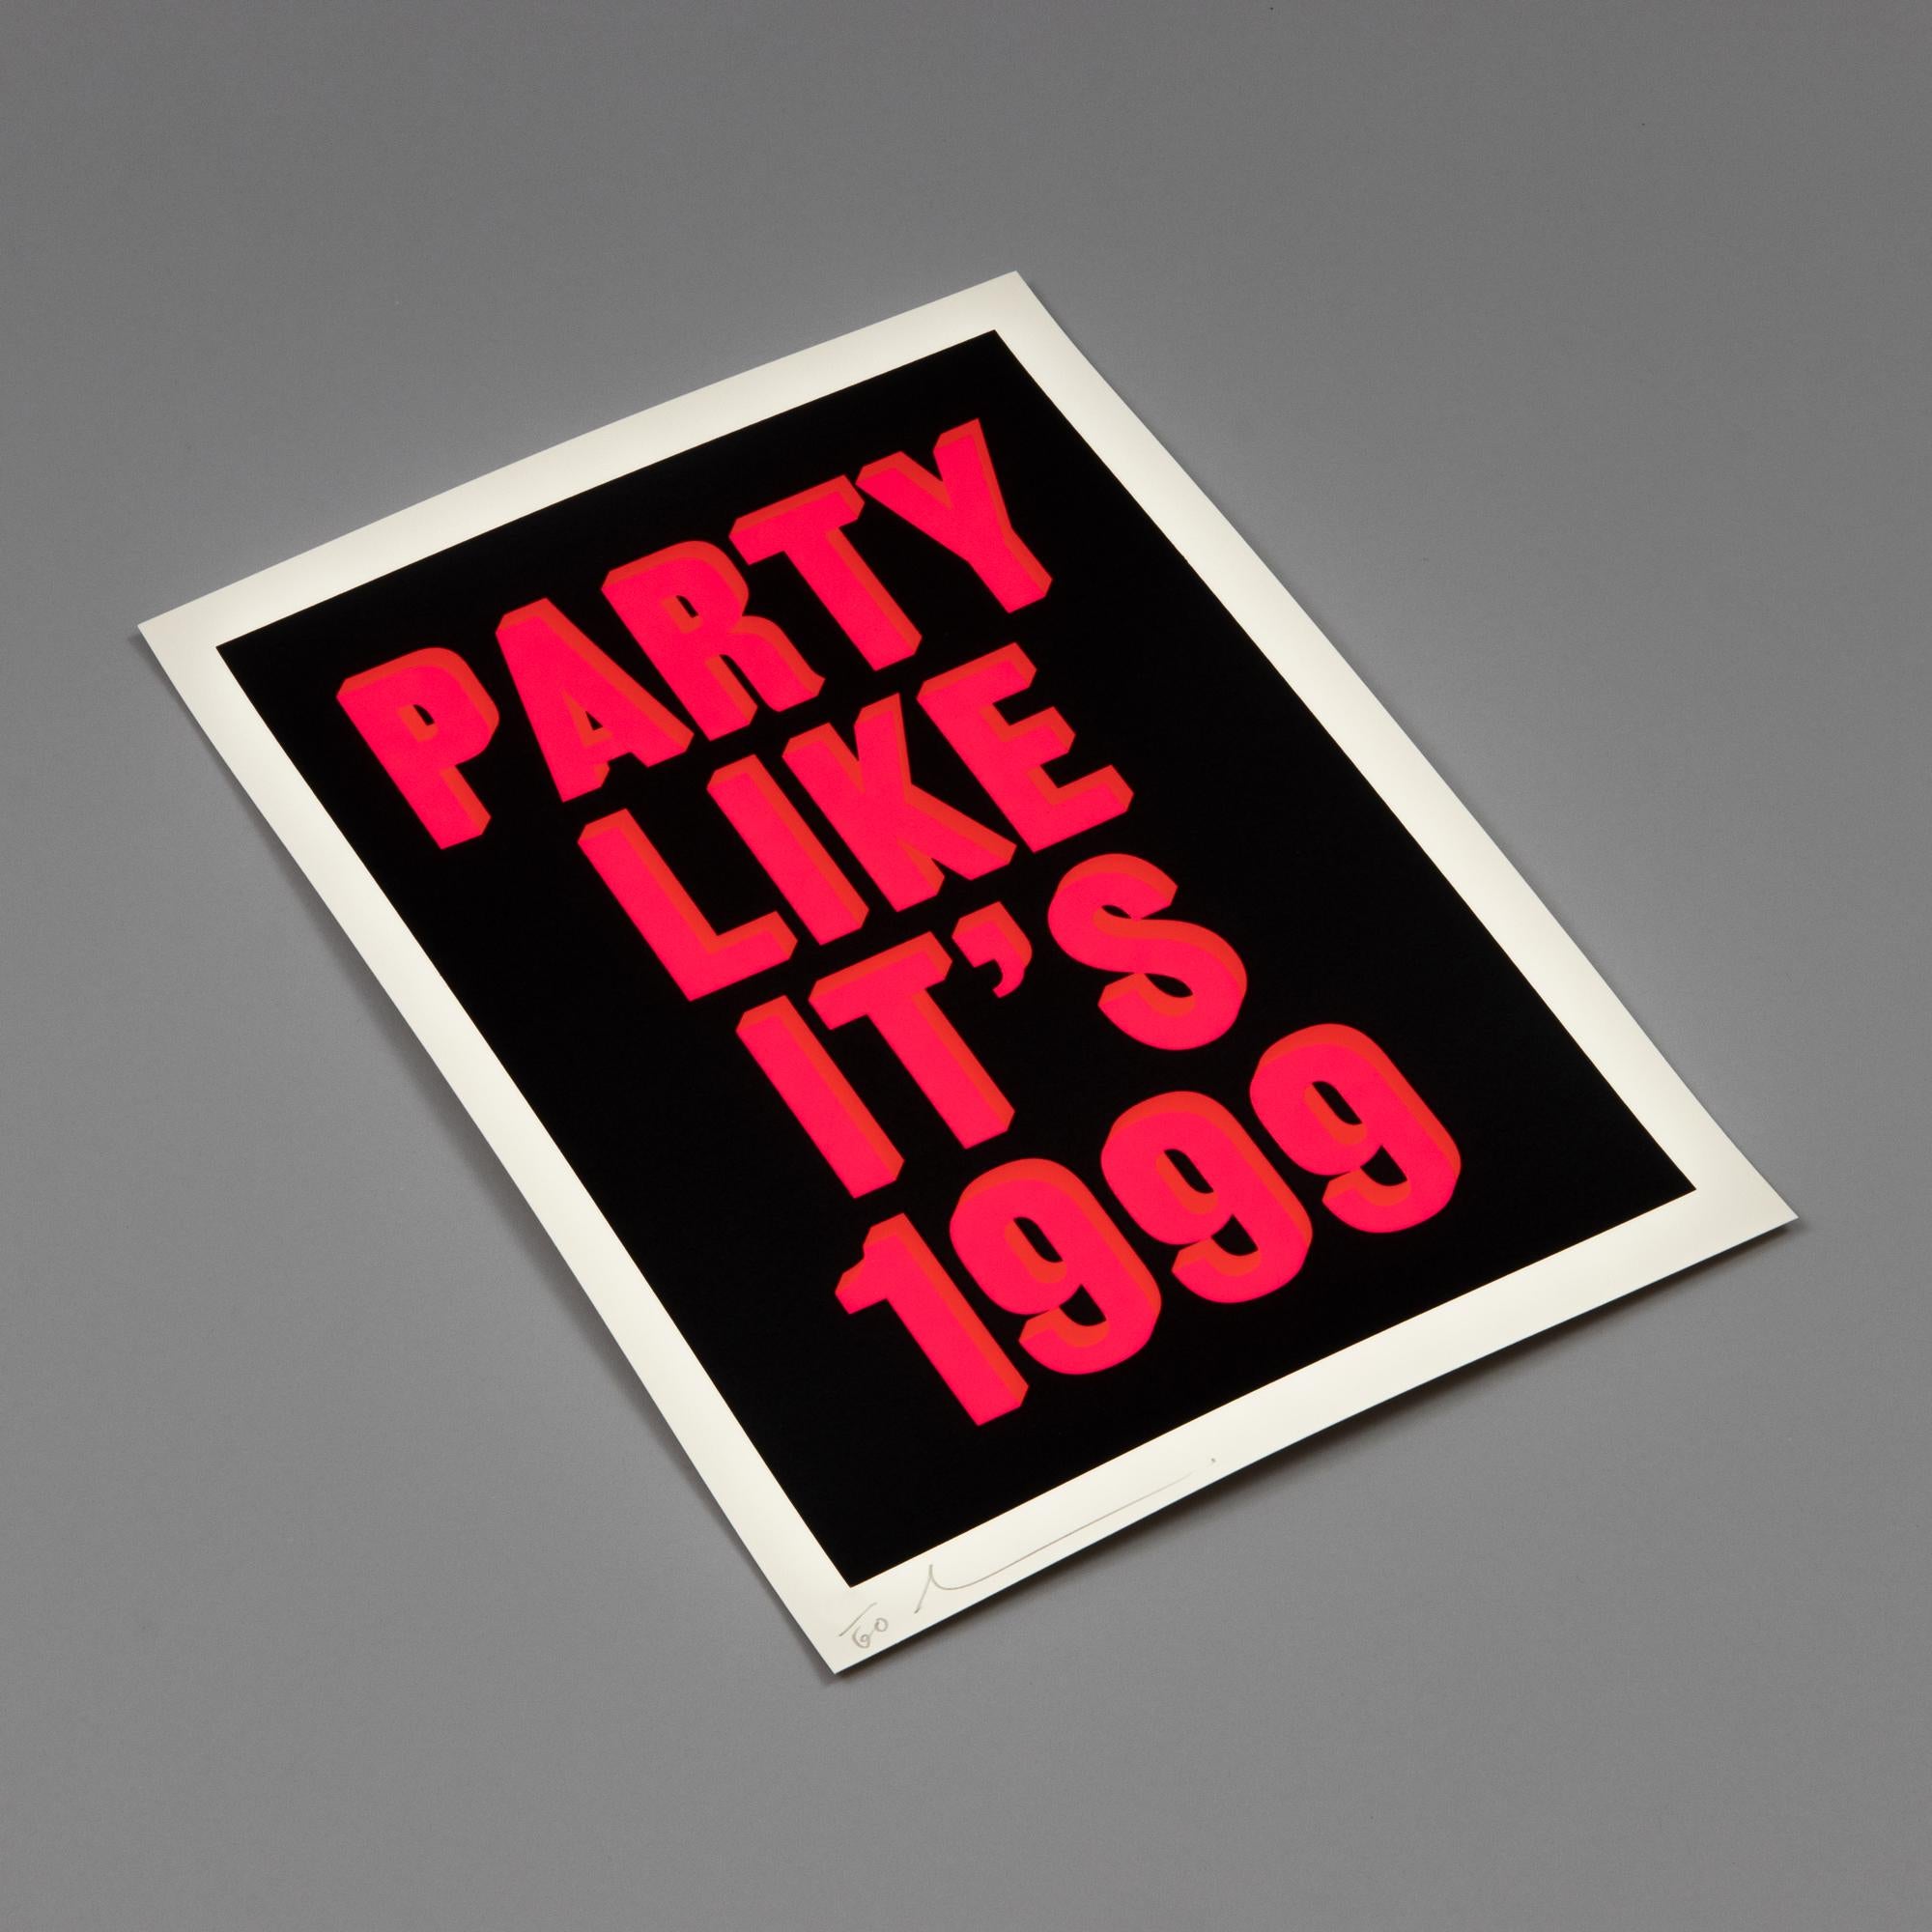 Dave Buonaguidi, Party Like It's 1999: Signed Screen Print, Contemporary Pop Art 2